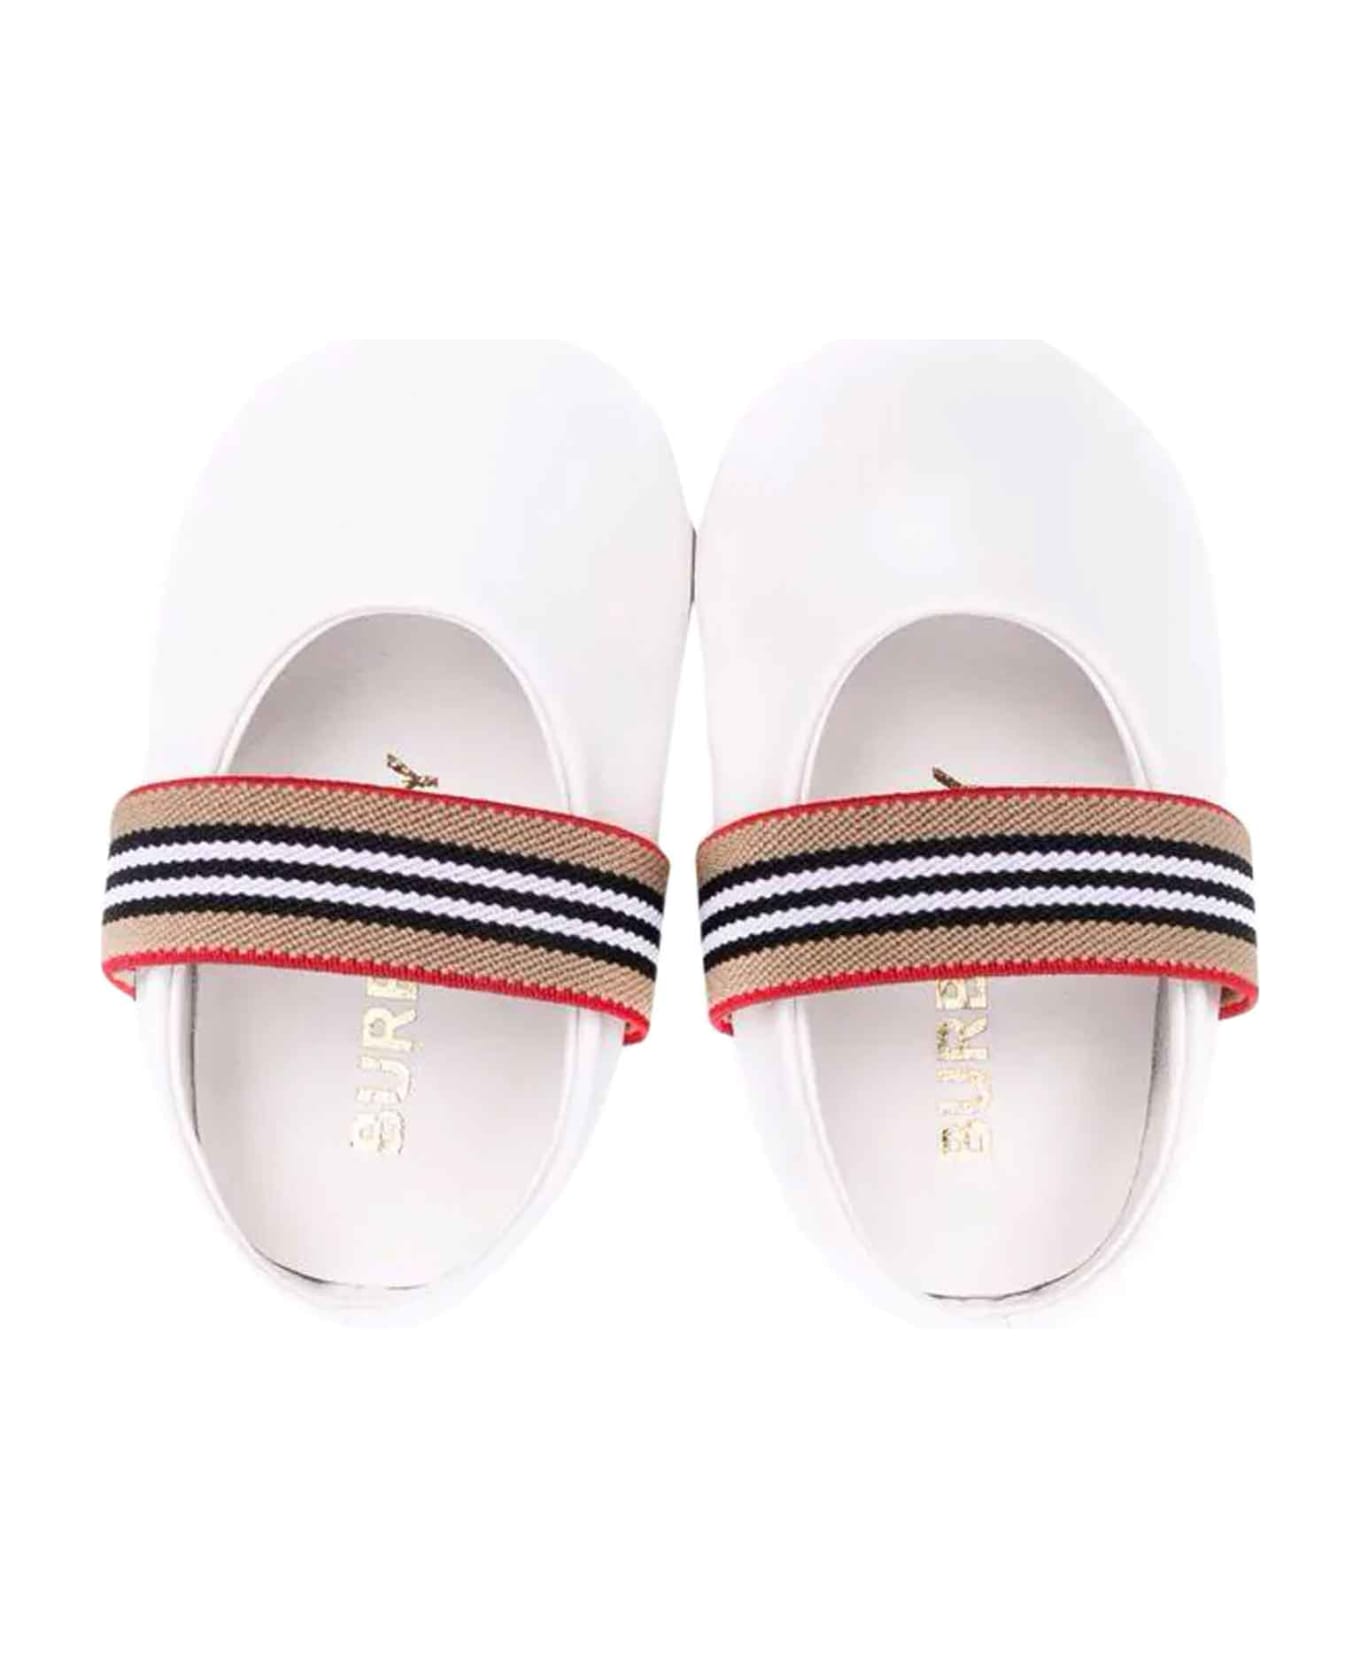 Burberry Ballet Flats With Check Print - Bianco シューズ